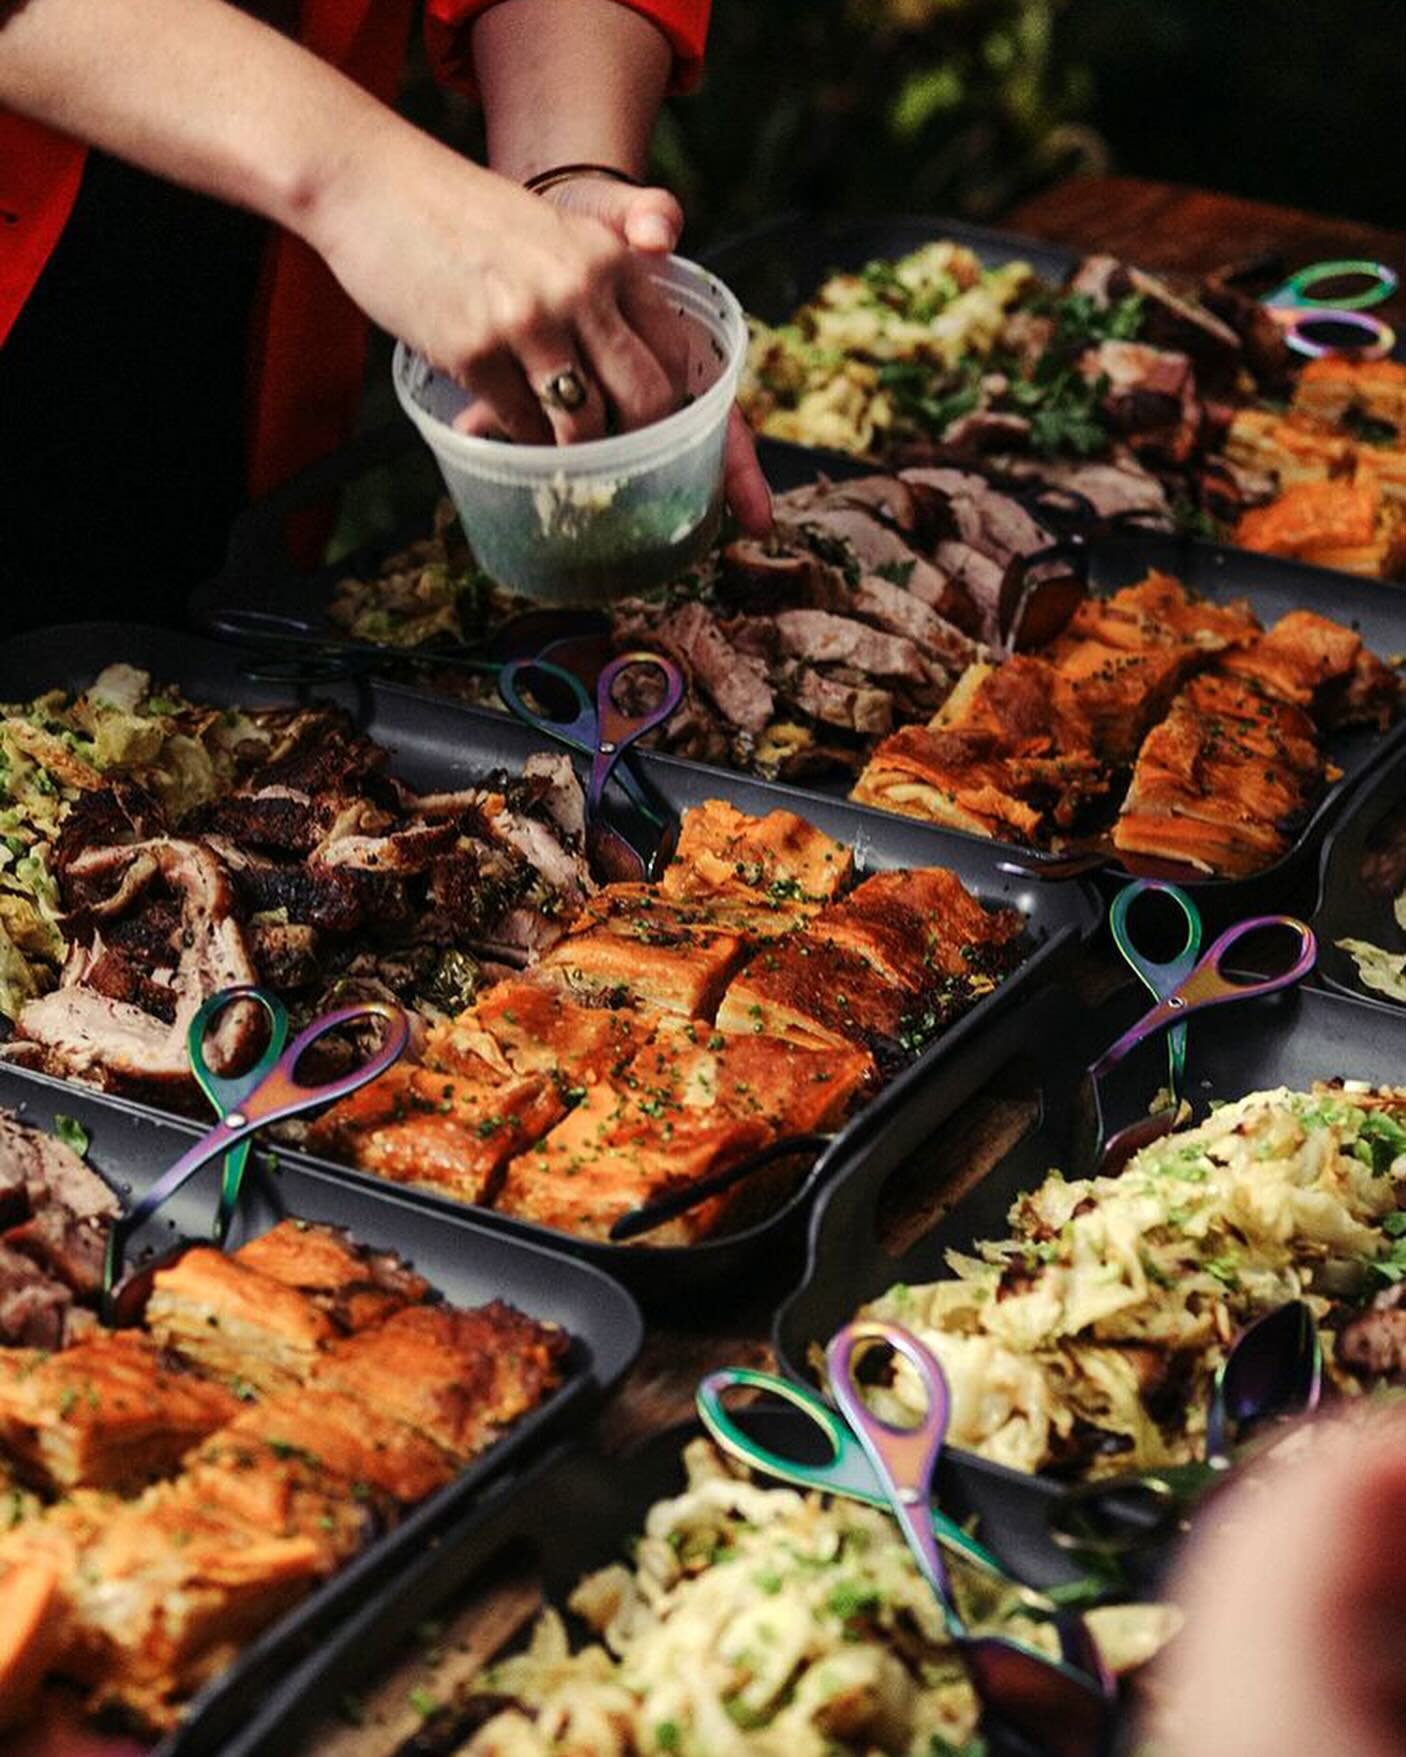 🎉 Adventure Dinner is now offering easy and stylish party catering drop-off!!! 💃🏼 🕺🏽

🥘 Choose from three delicious, customizable, and nourishing catering menus. Sourced from Vermont farms and delivered straight to your door. 👋 

We love this 